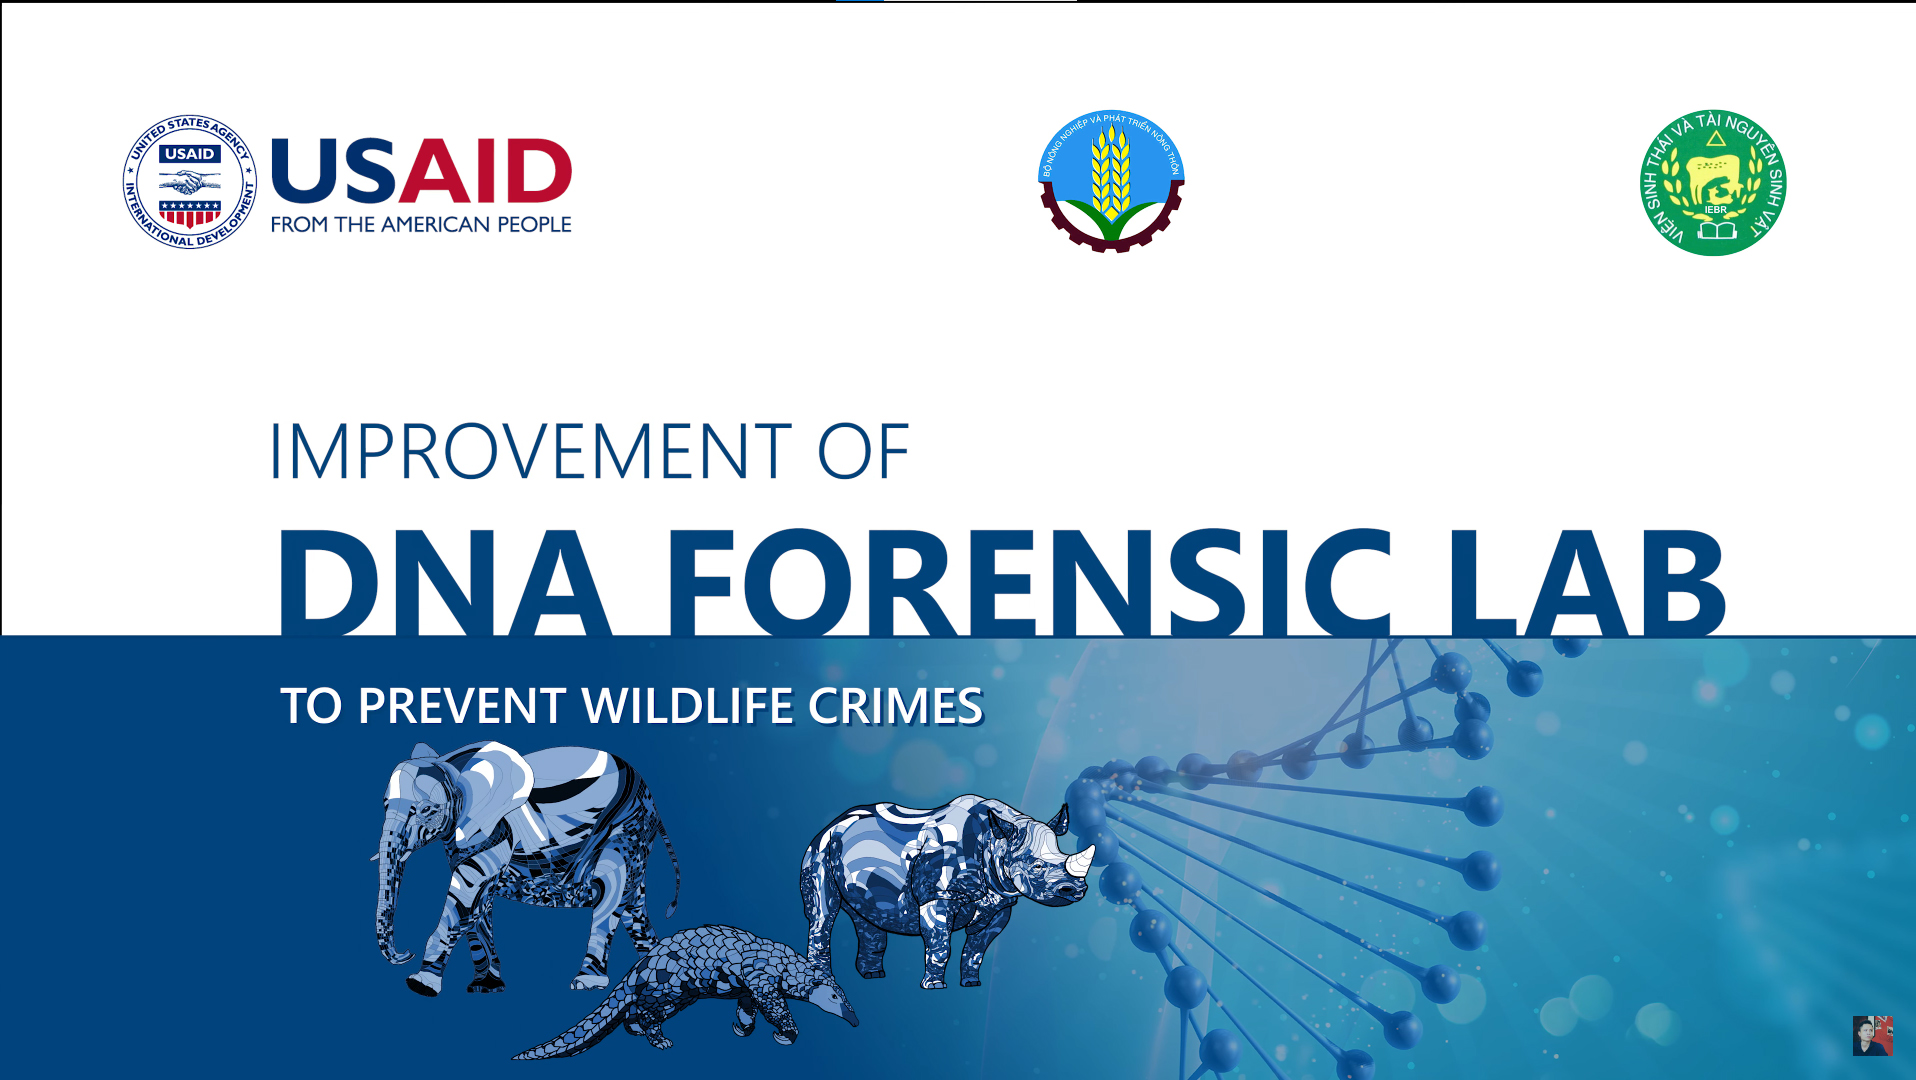 IMPROVEMENT OF DNA FORENSIC LAB